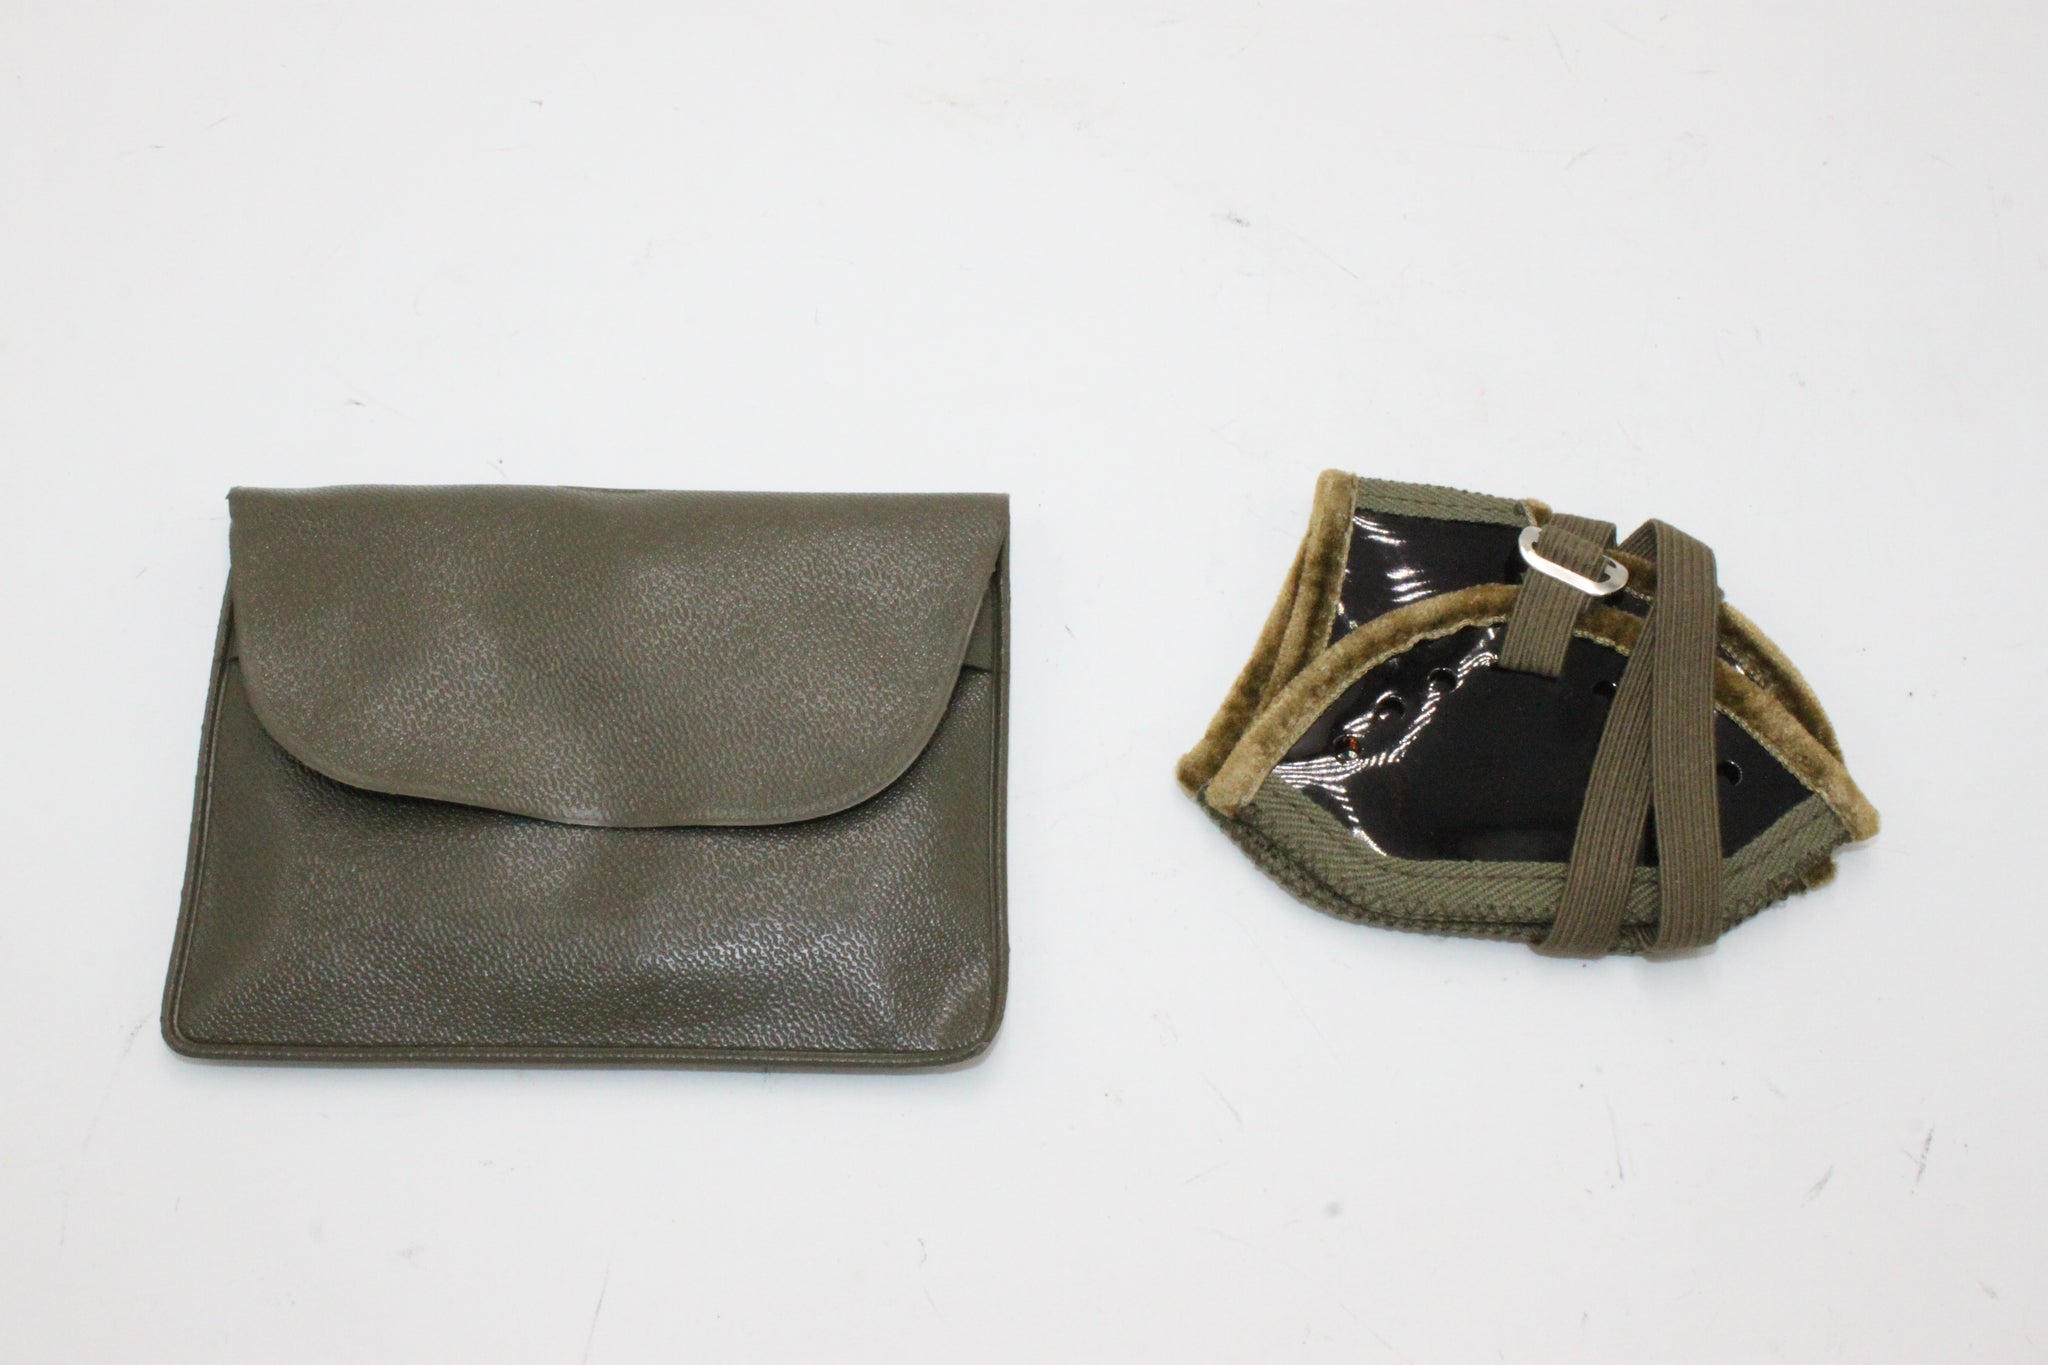 German Folding Goggles W/pouch Used